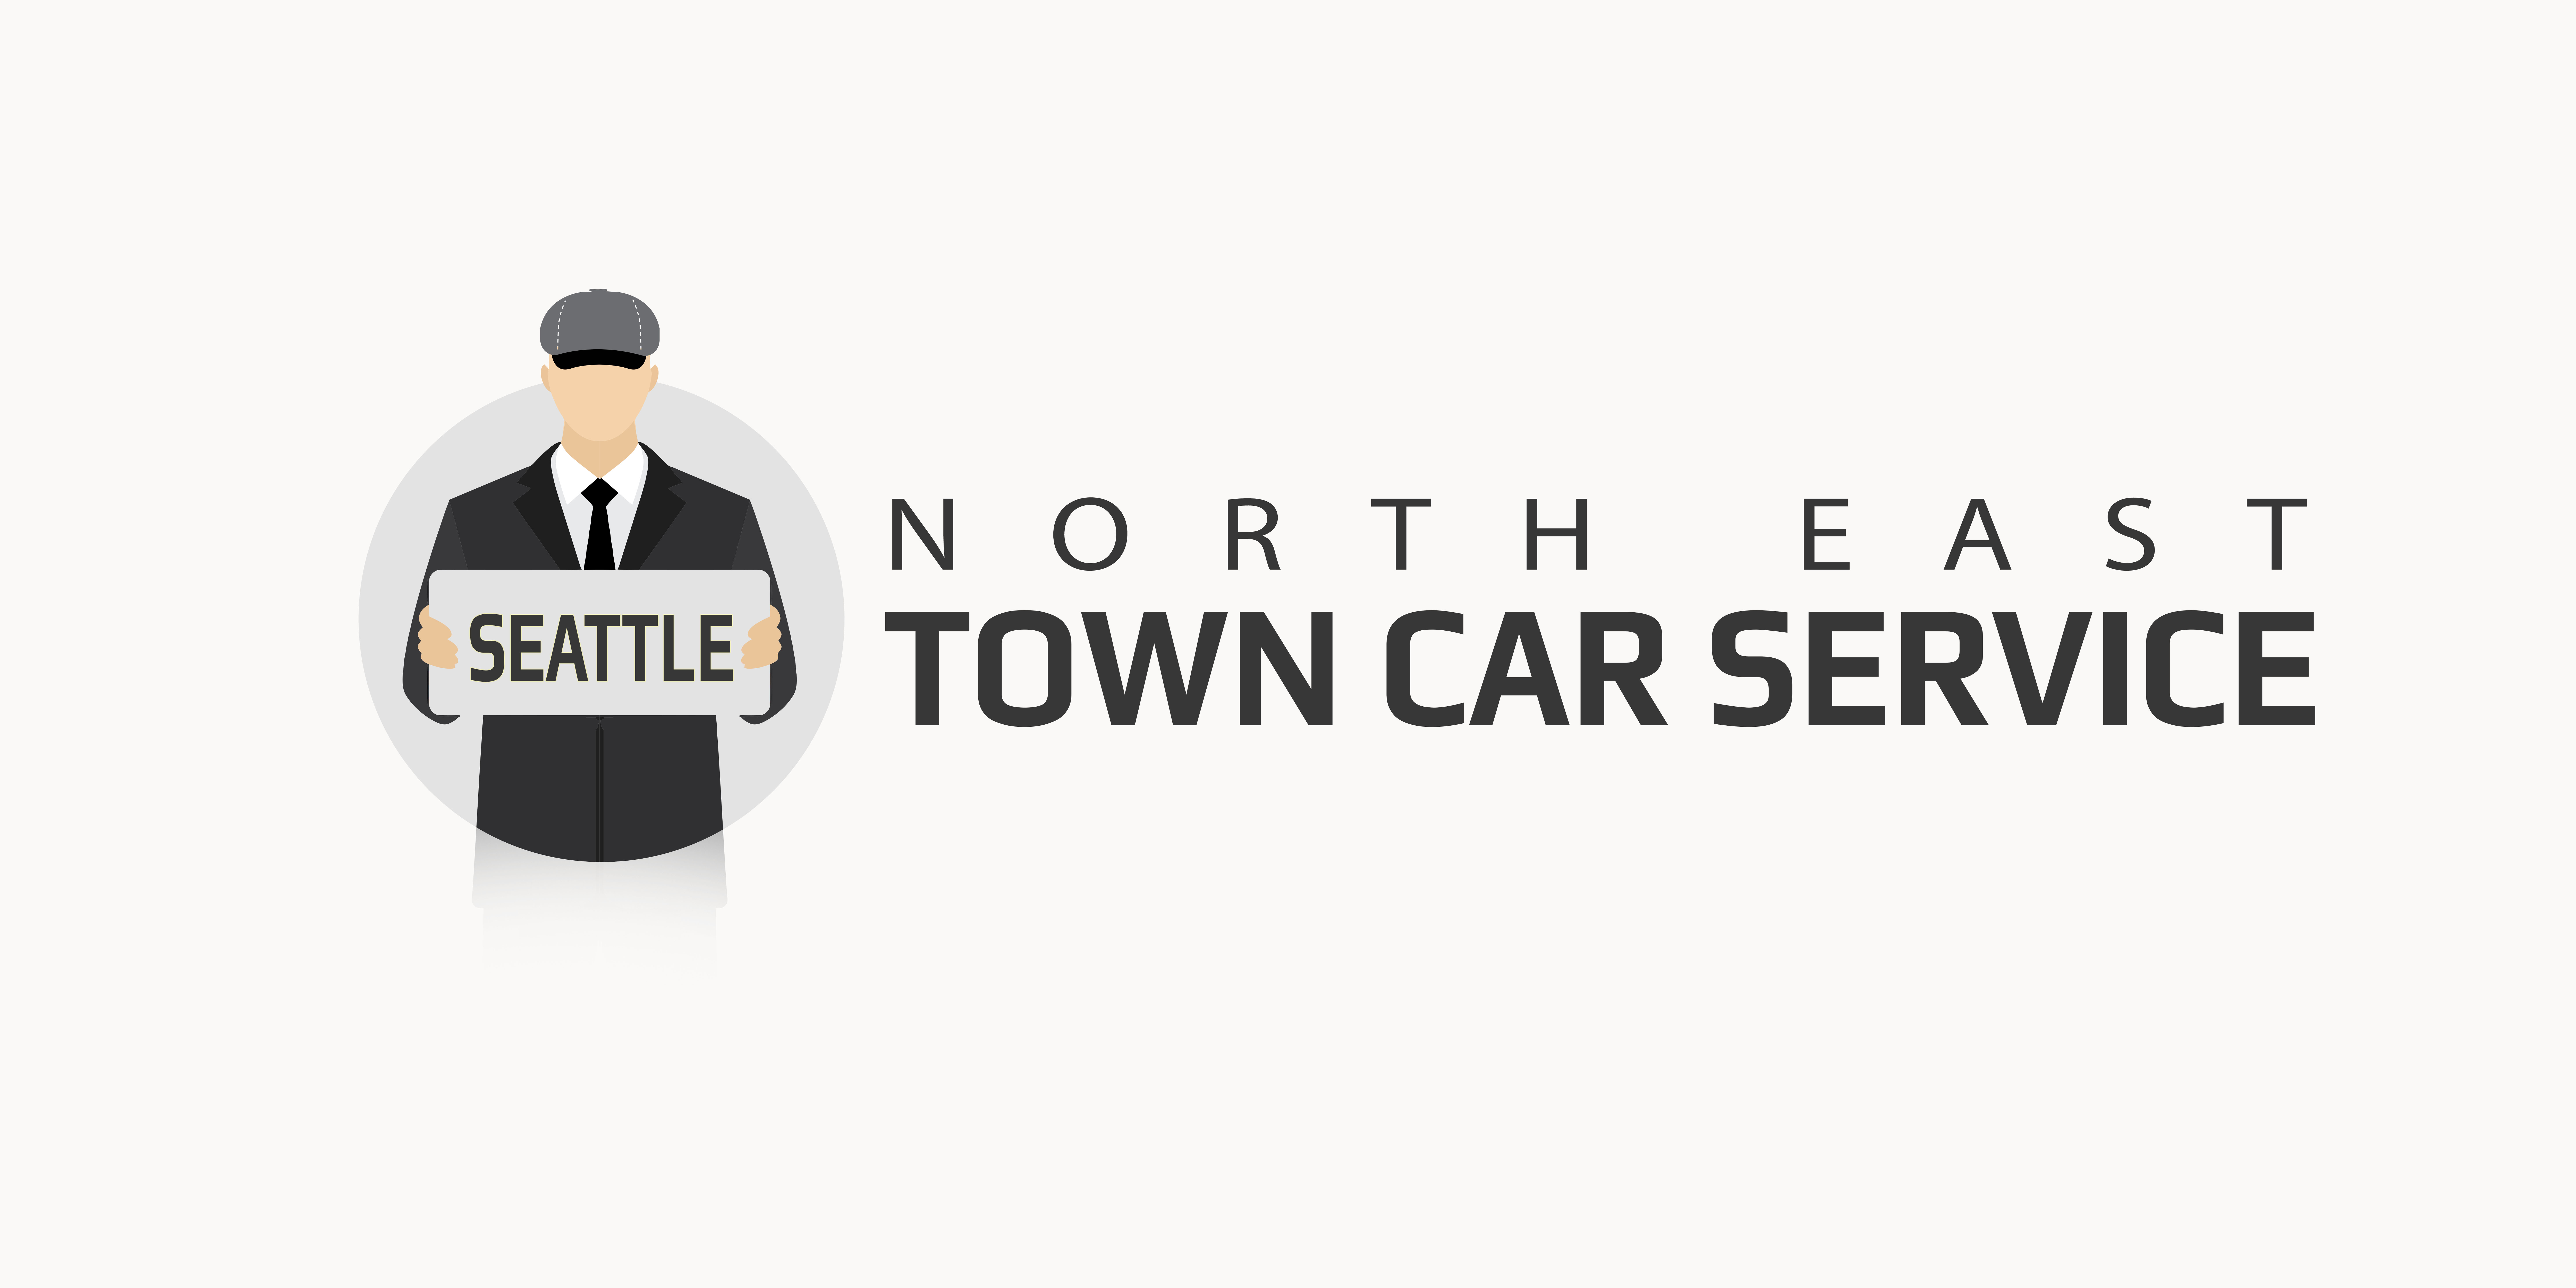 Seattle North East Town Car Service